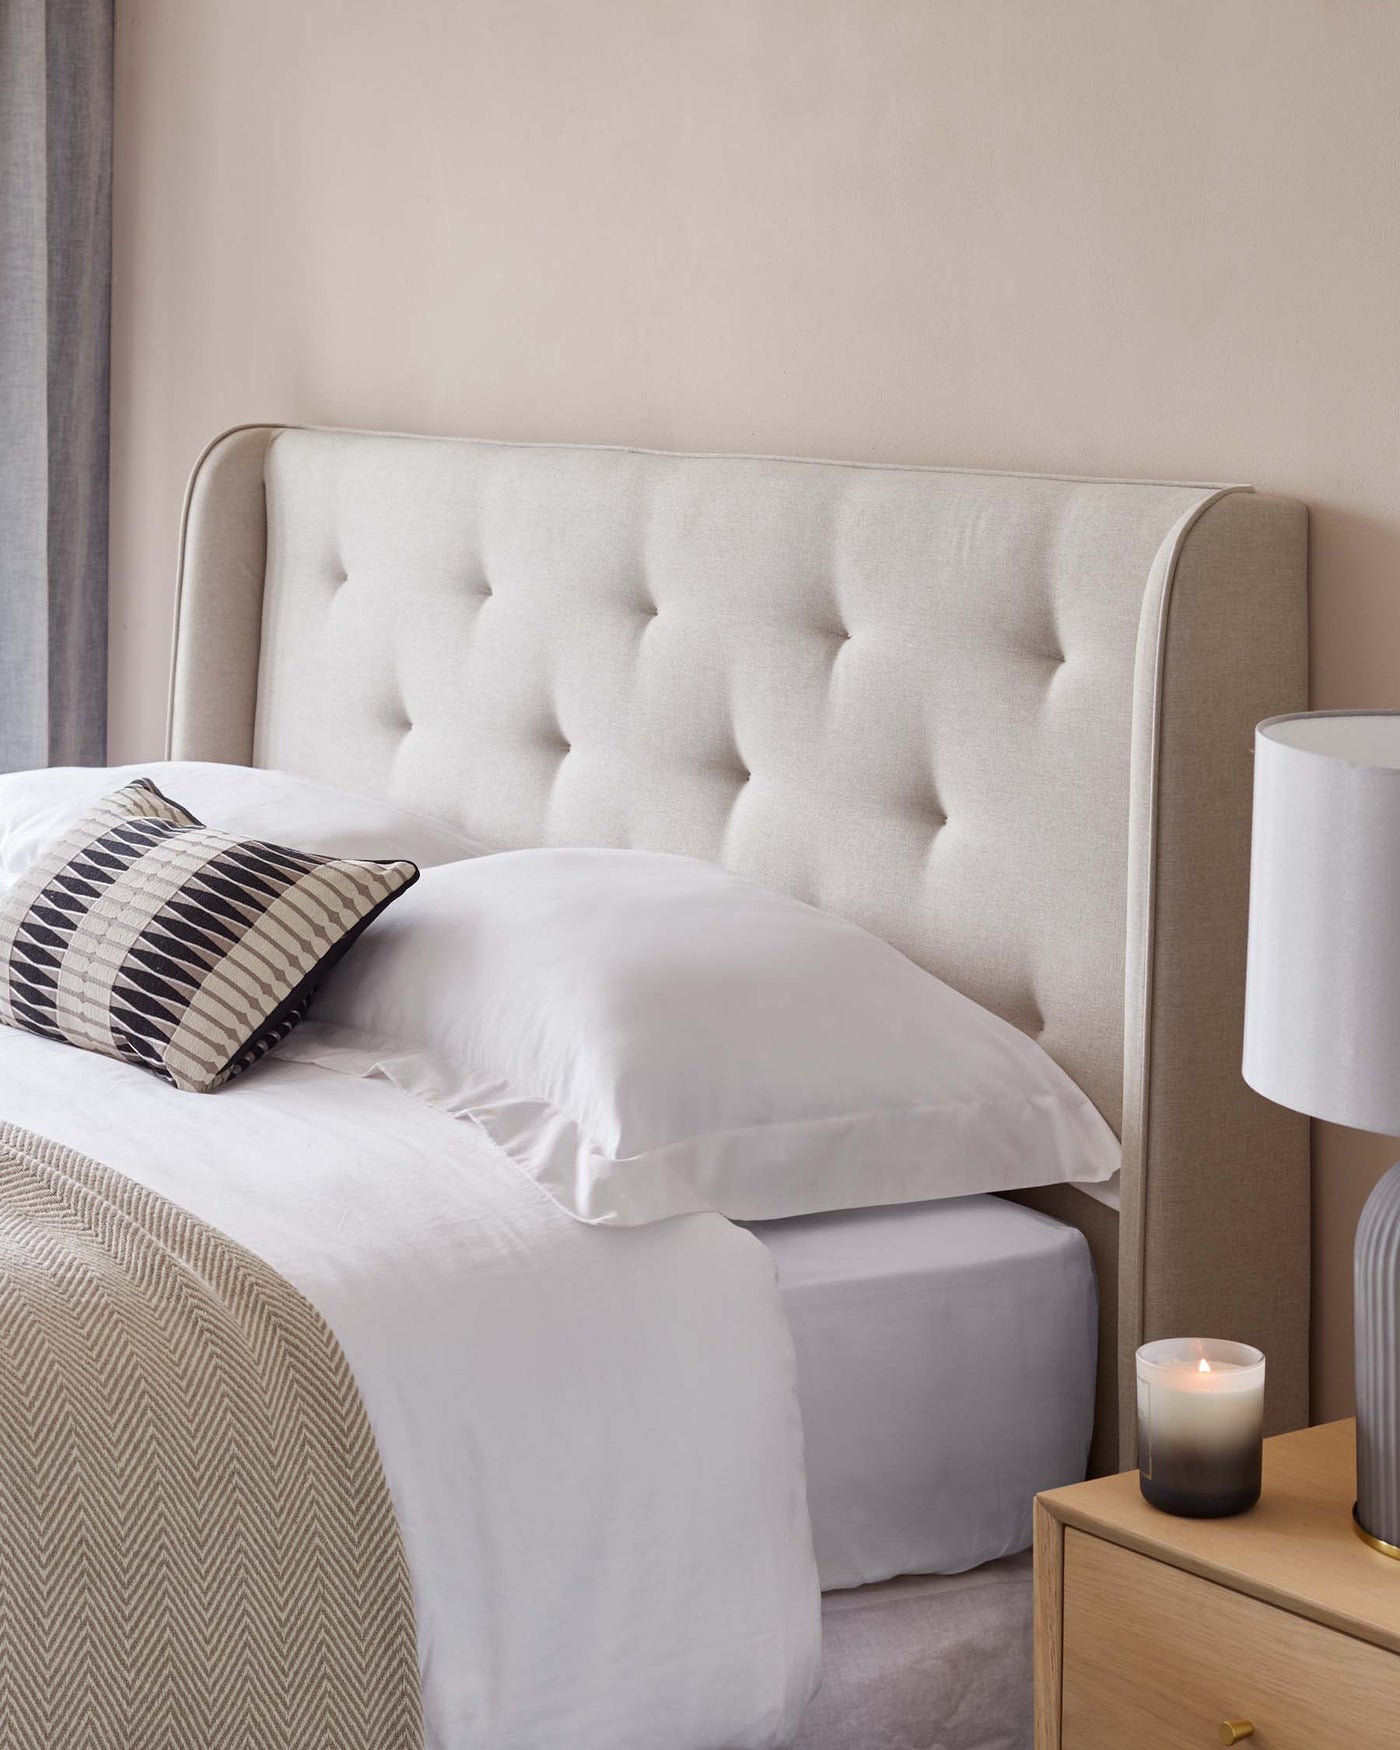 Elegant bedroom scene featuring a light beige, tufted upholstered headboard with a curved top edge, paired with crisp white bedding on a neatly made bed. A wooden bedside table with a smooth finish and round gold handle is placed next to the bed, showcasing a white cylindrical table lamp with a minimalist design and a lite scented candle.